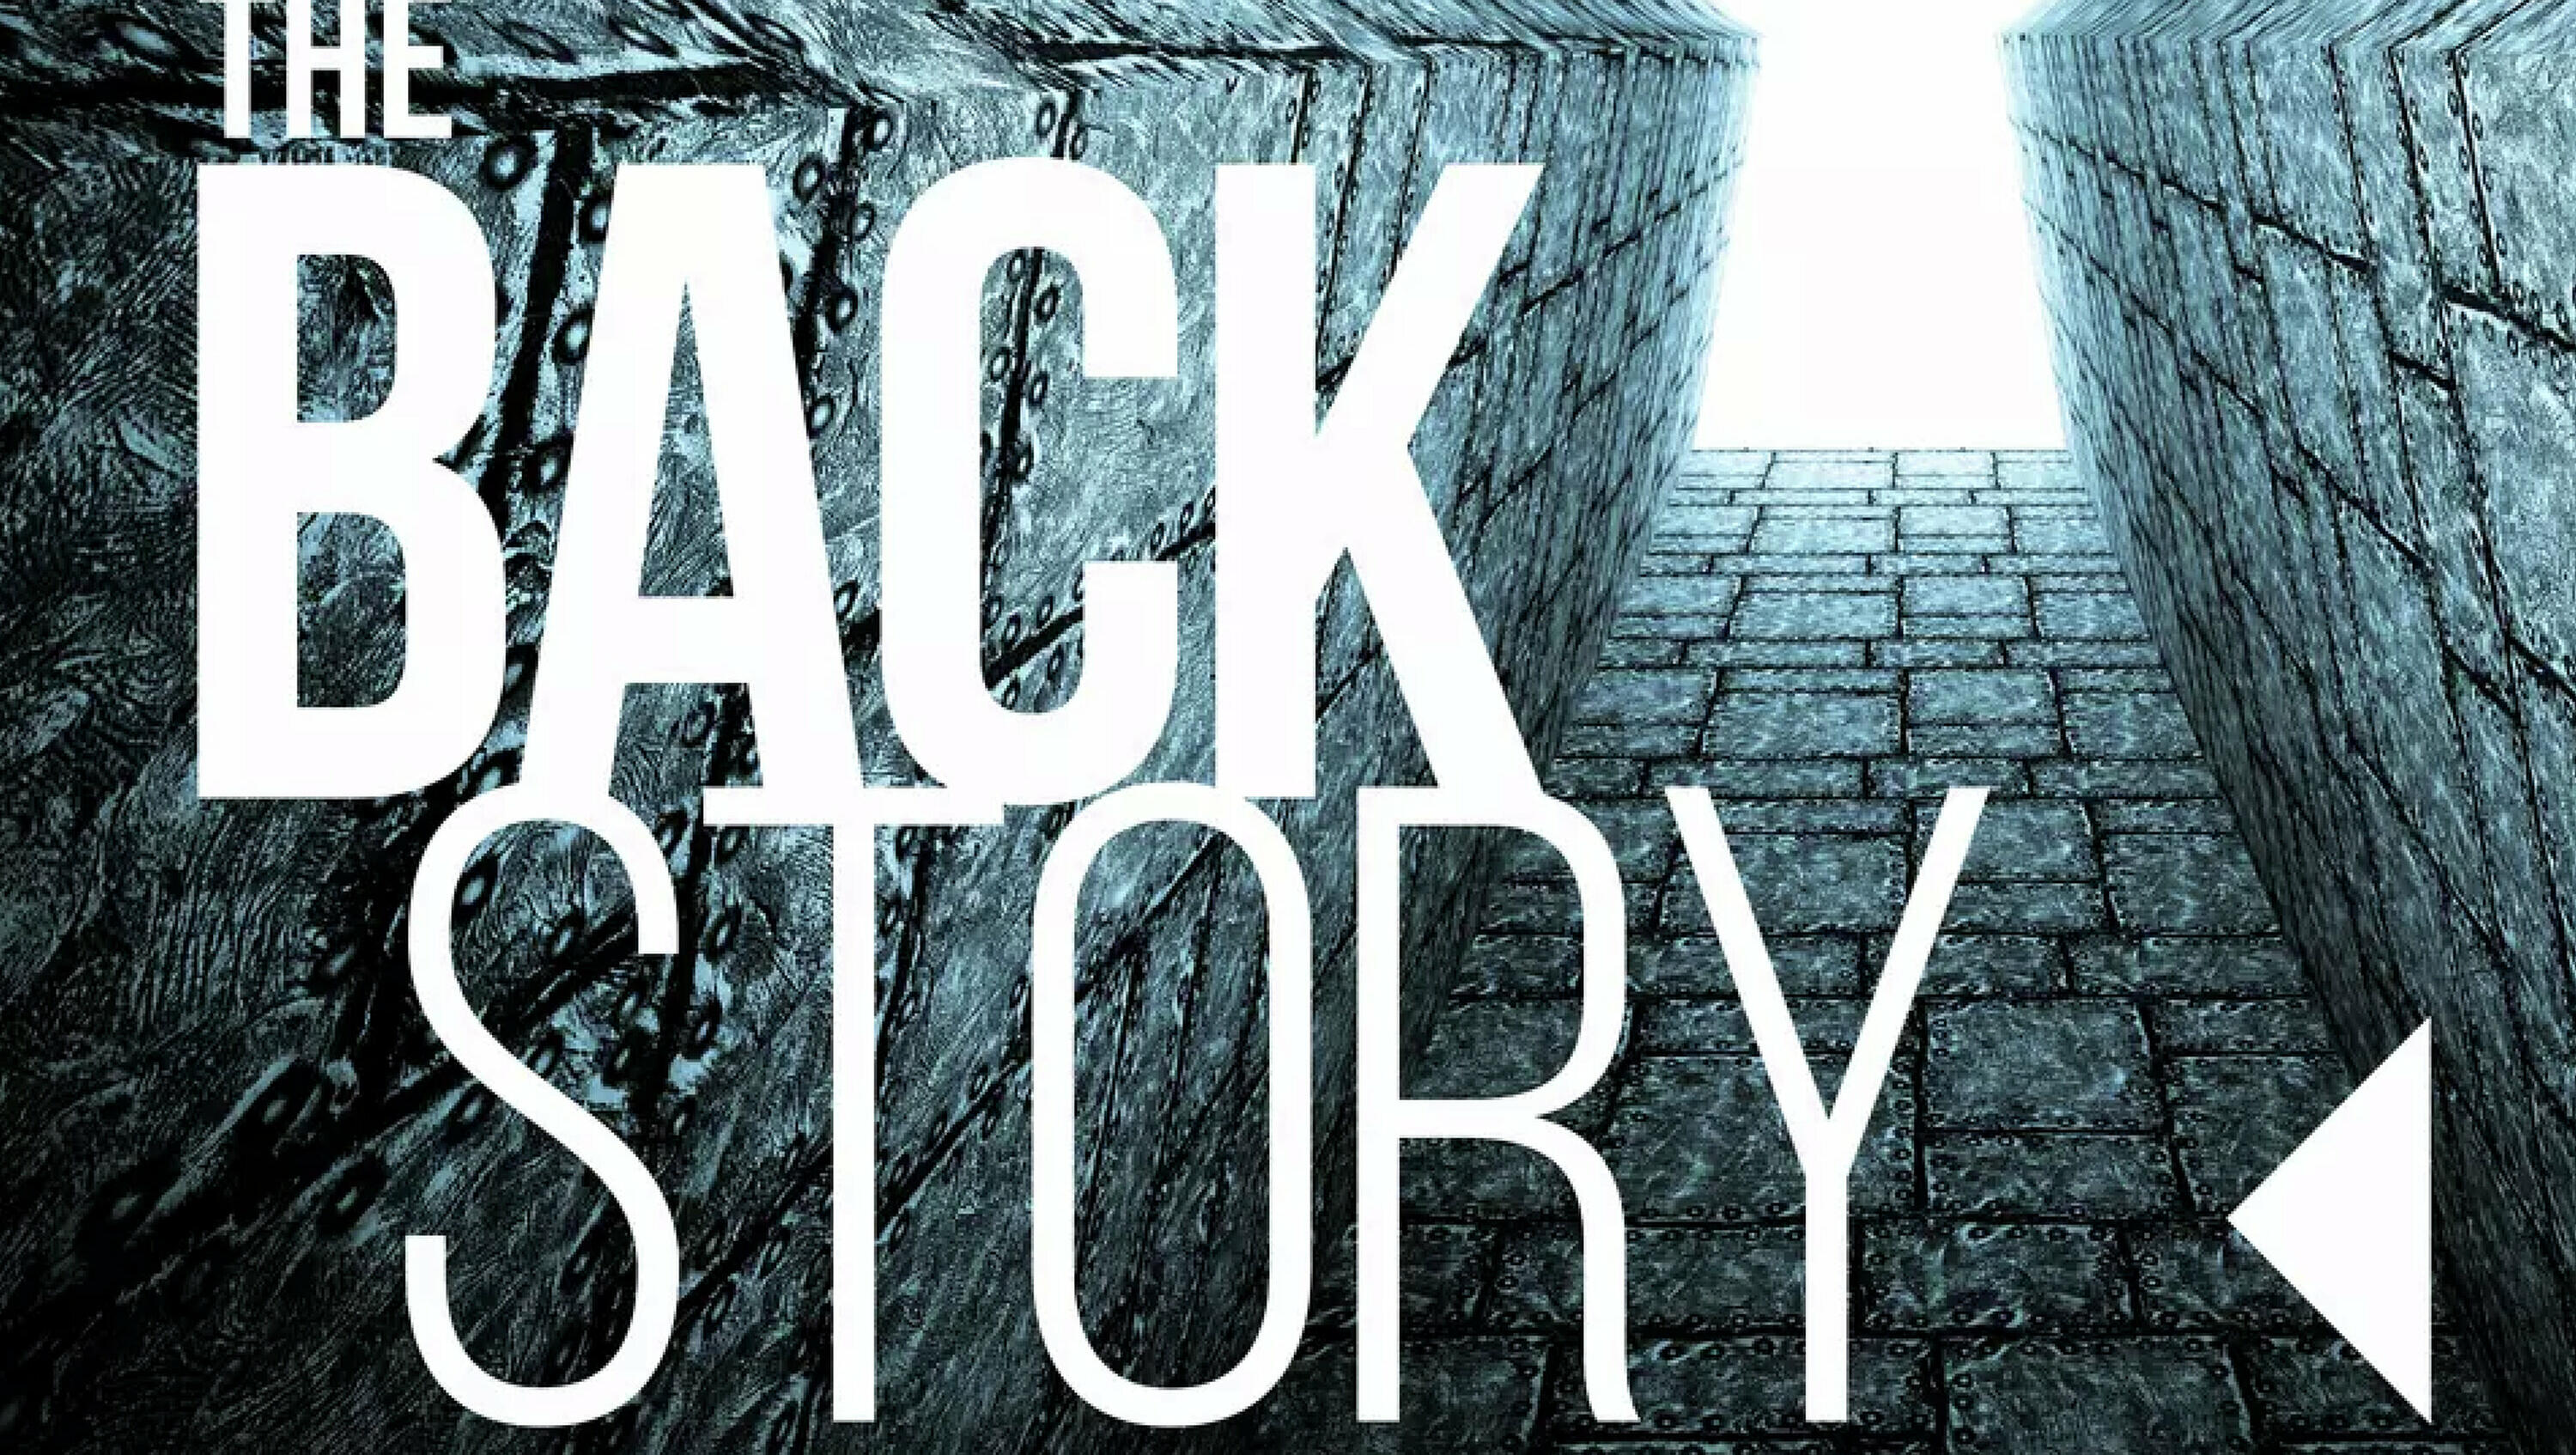 The Backstory: A hero emerges from a 19th century insane asylum